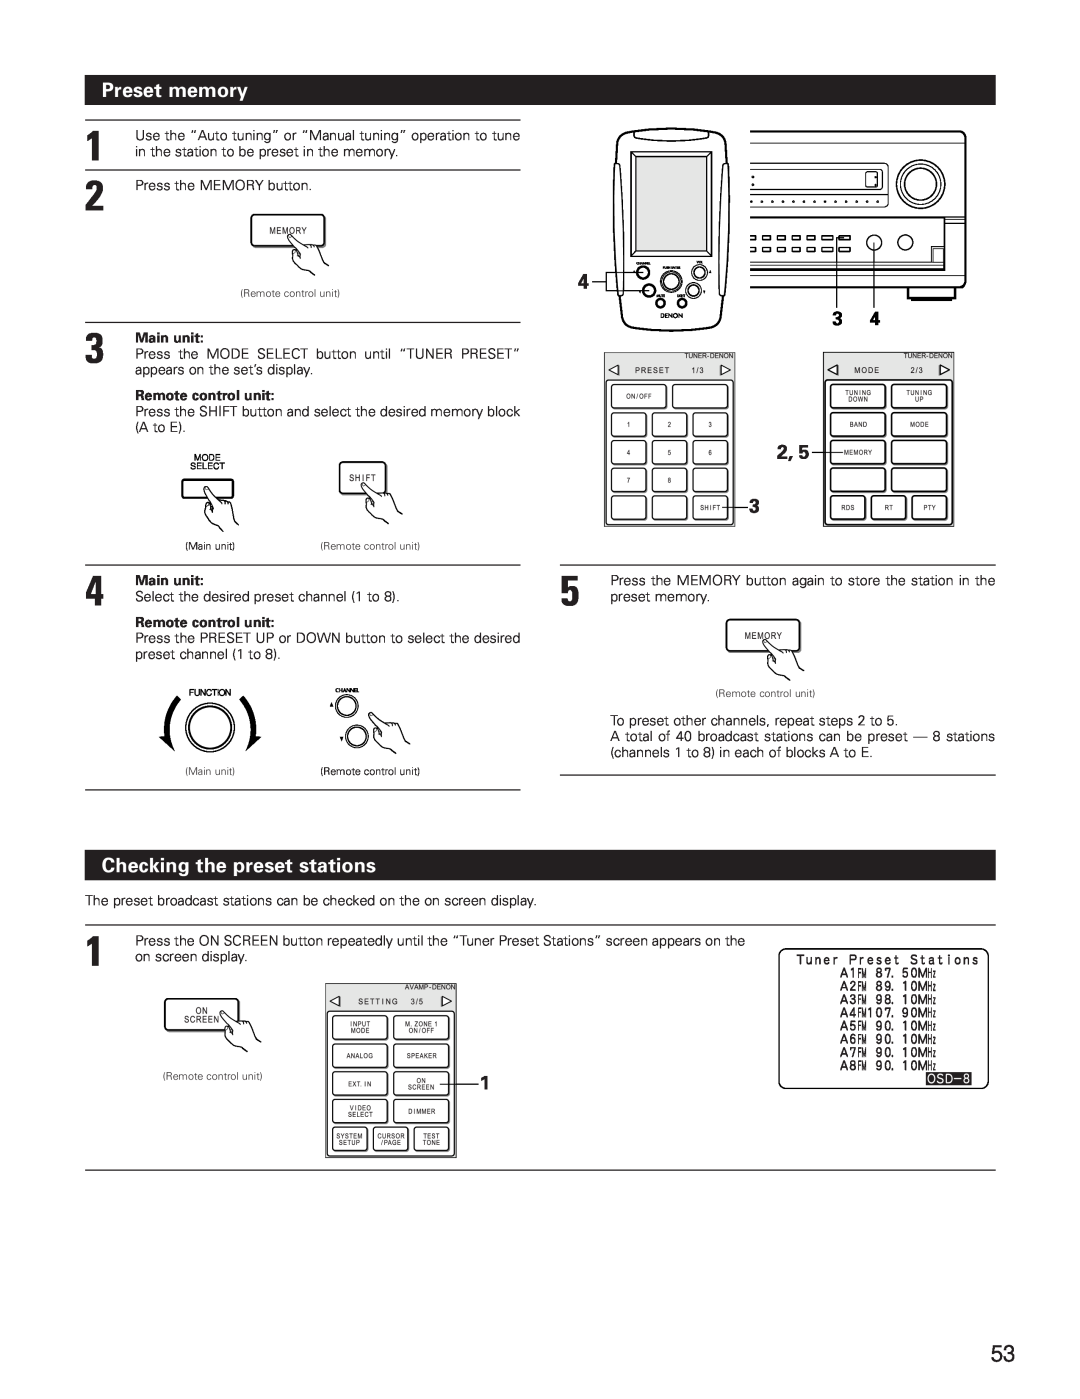 Denon AVR-5800 operating instructions Preset memory, Checking the preset stations, Main unit, Remote control unit 